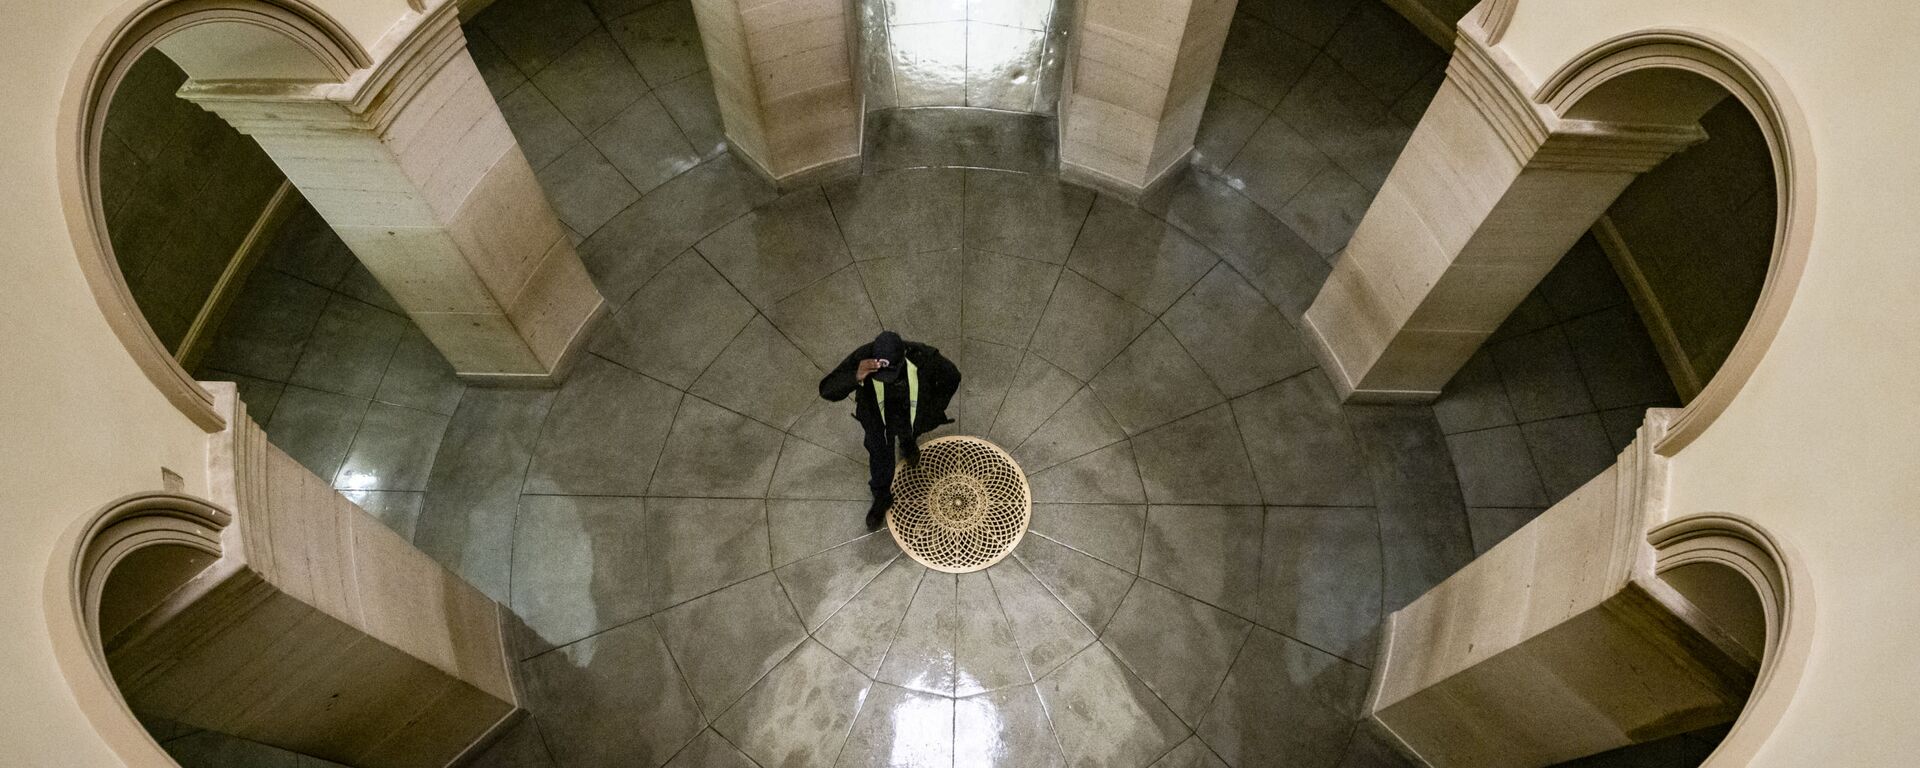 A US Capitol Police officer walks through the US Capitol Building on 1 August 2021 in Washington, DC. Congress is working to come to an agreement to pass President Biden's proposed infrastructure bill before they head into their August recess on the 9th.  - Sputnik International, 1920, 02.08.2021